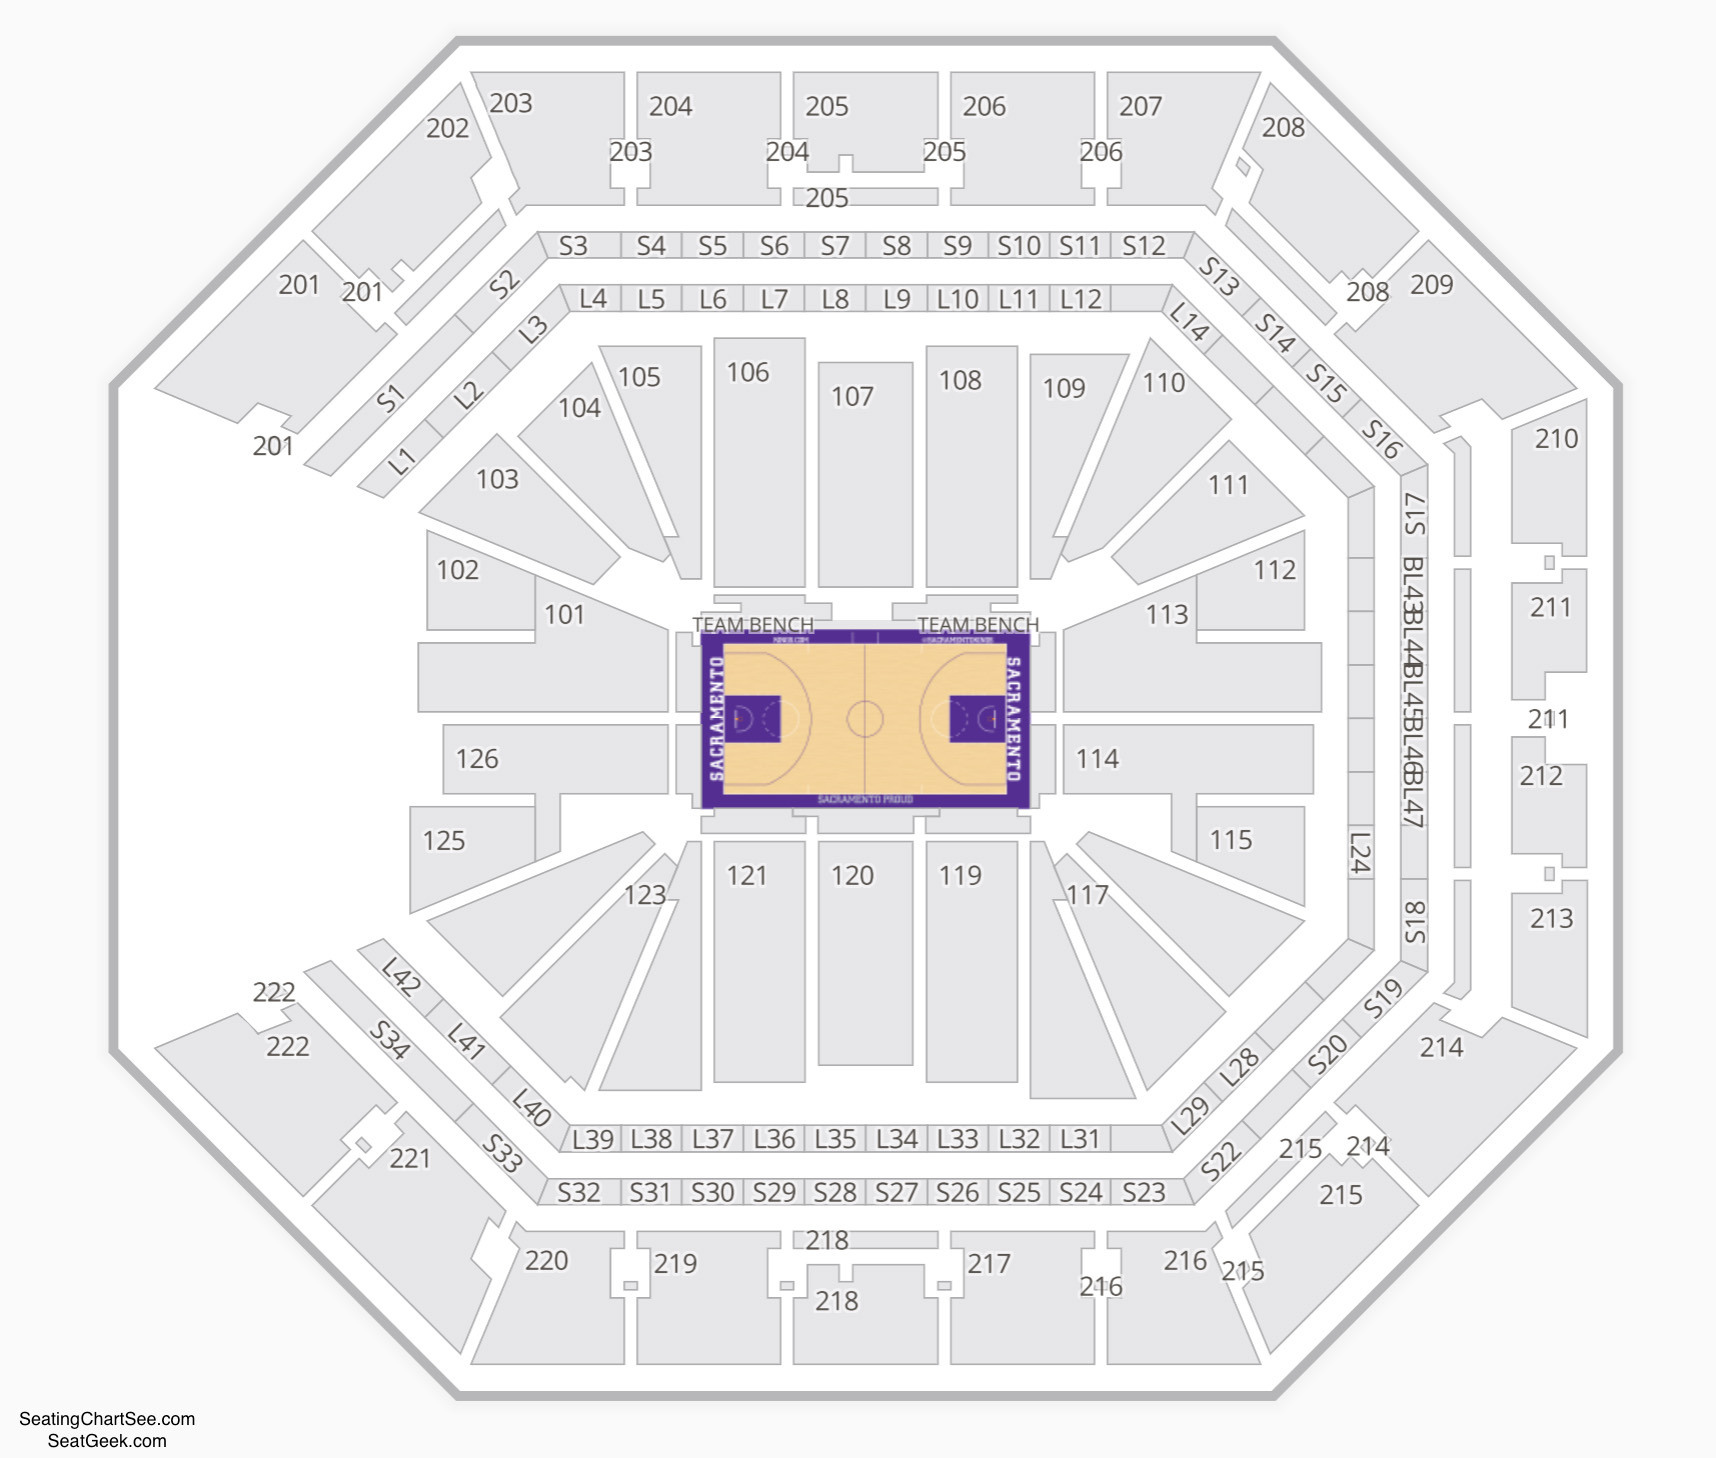 Seat Number Golden 1 Center Seating